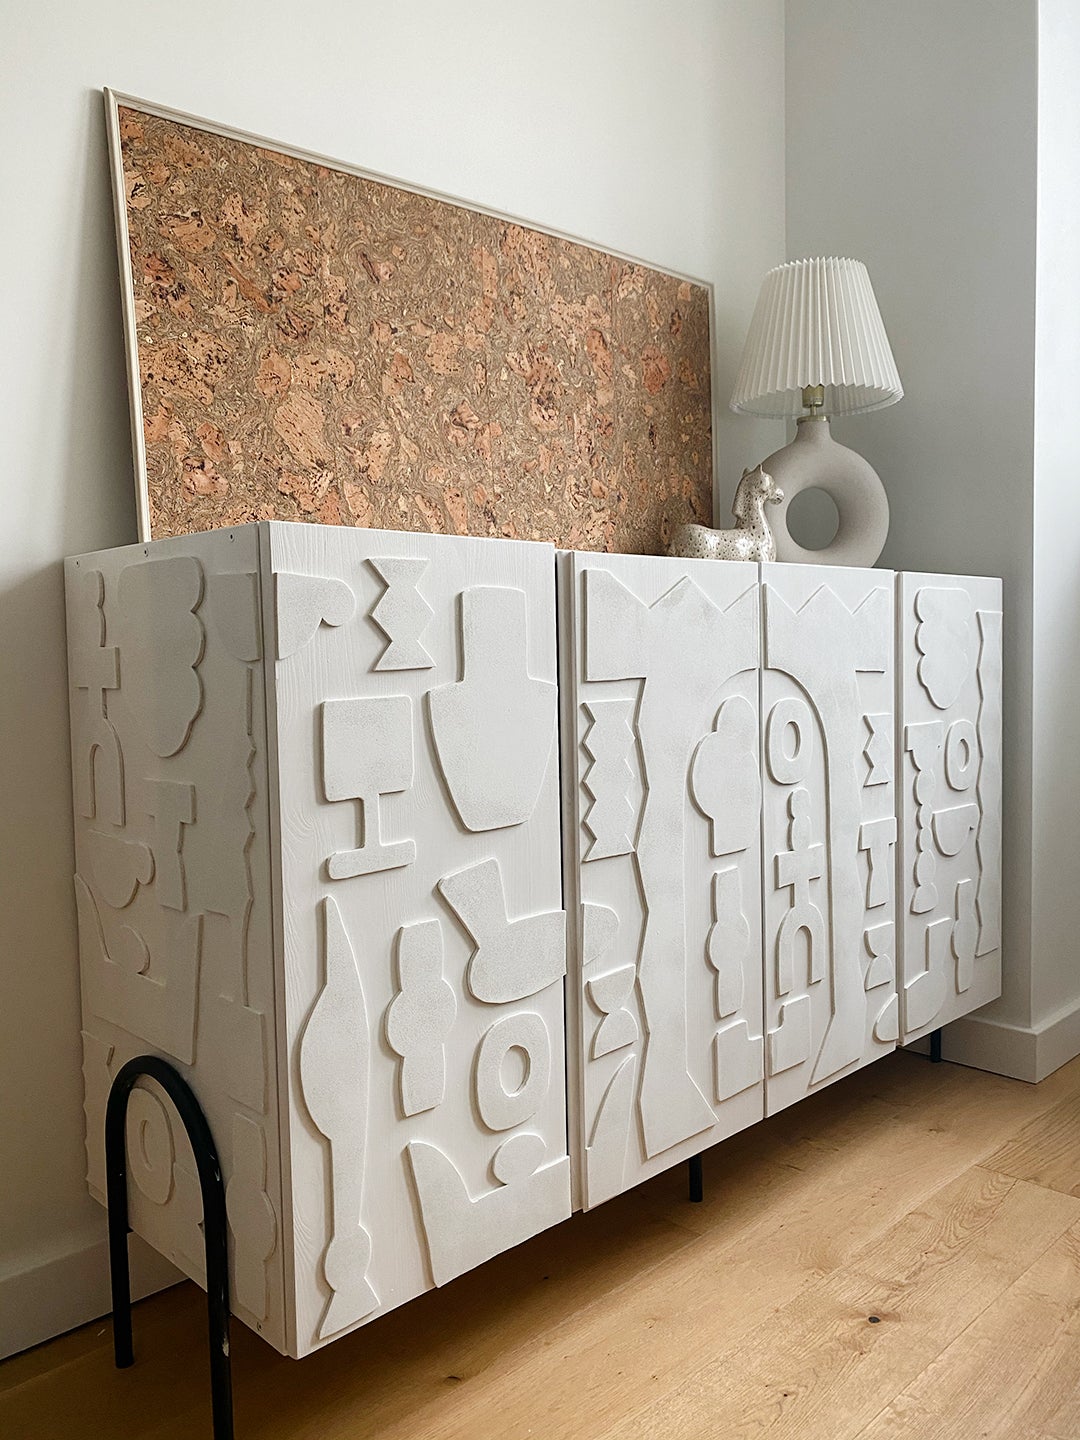 shapes on cabinet